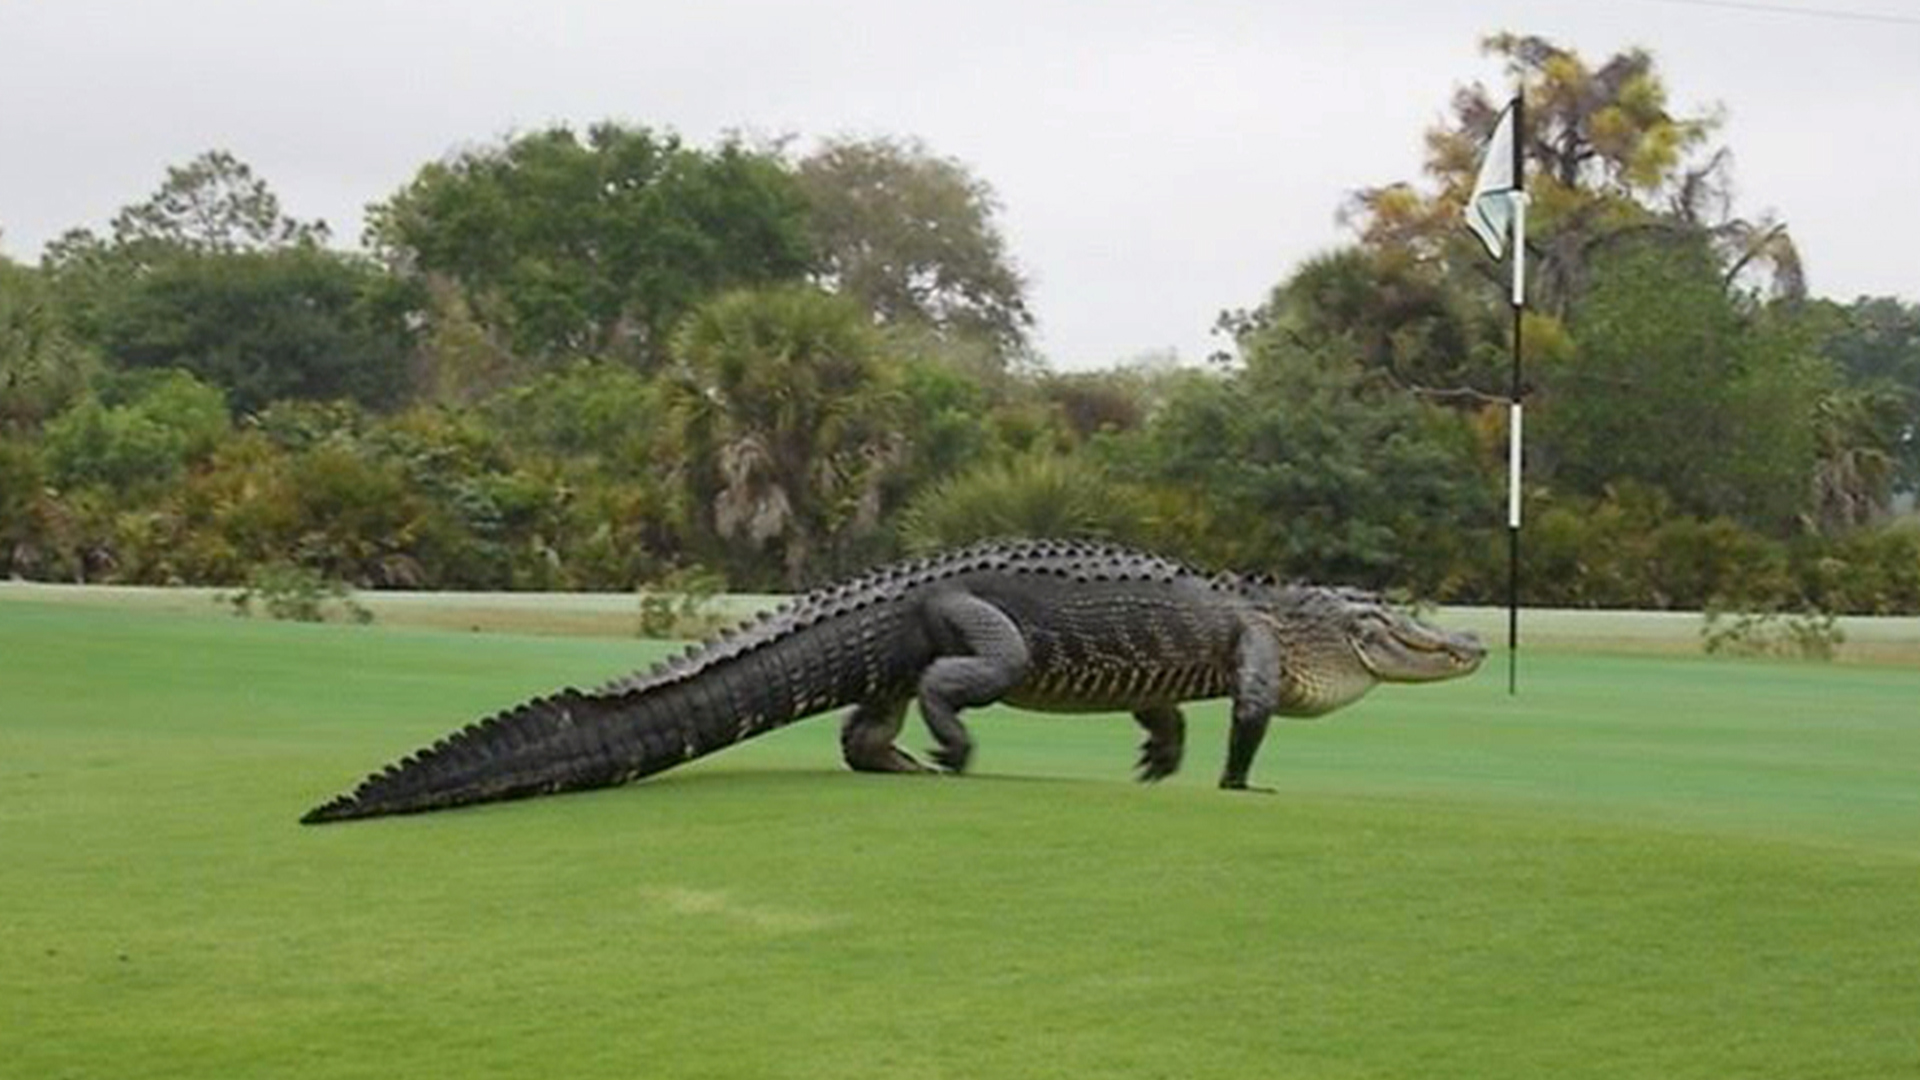 Photos of giant alligator prowling on Florida golf course go viral